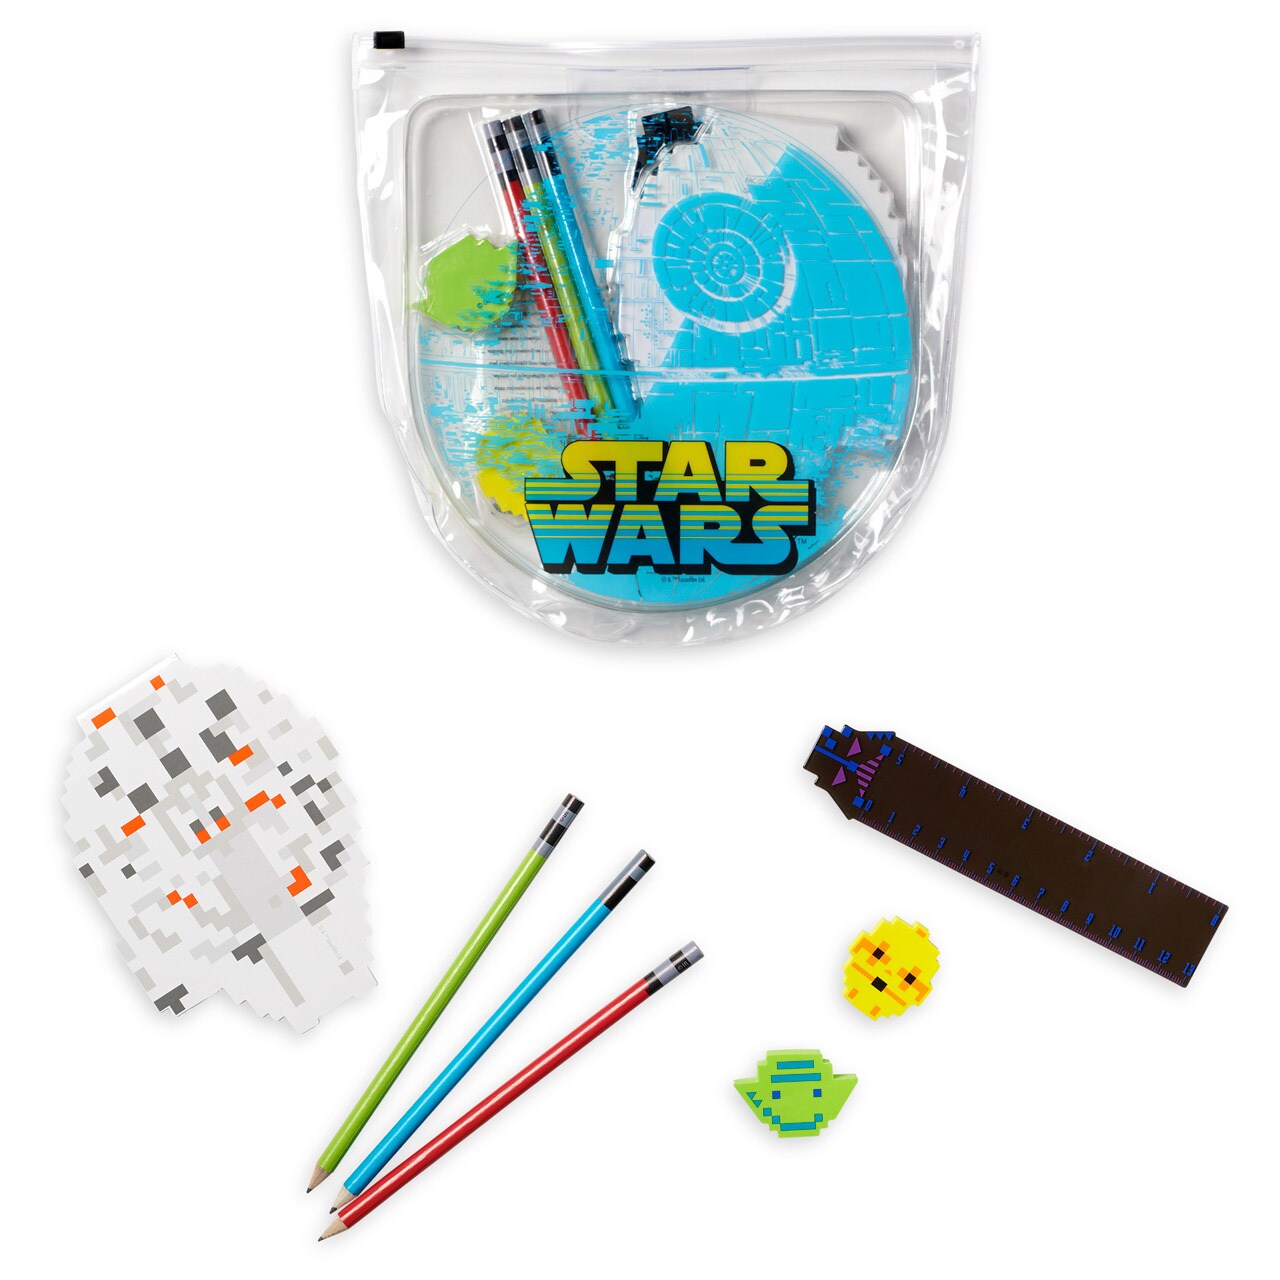 Star Wars back-to-school shopping list items.